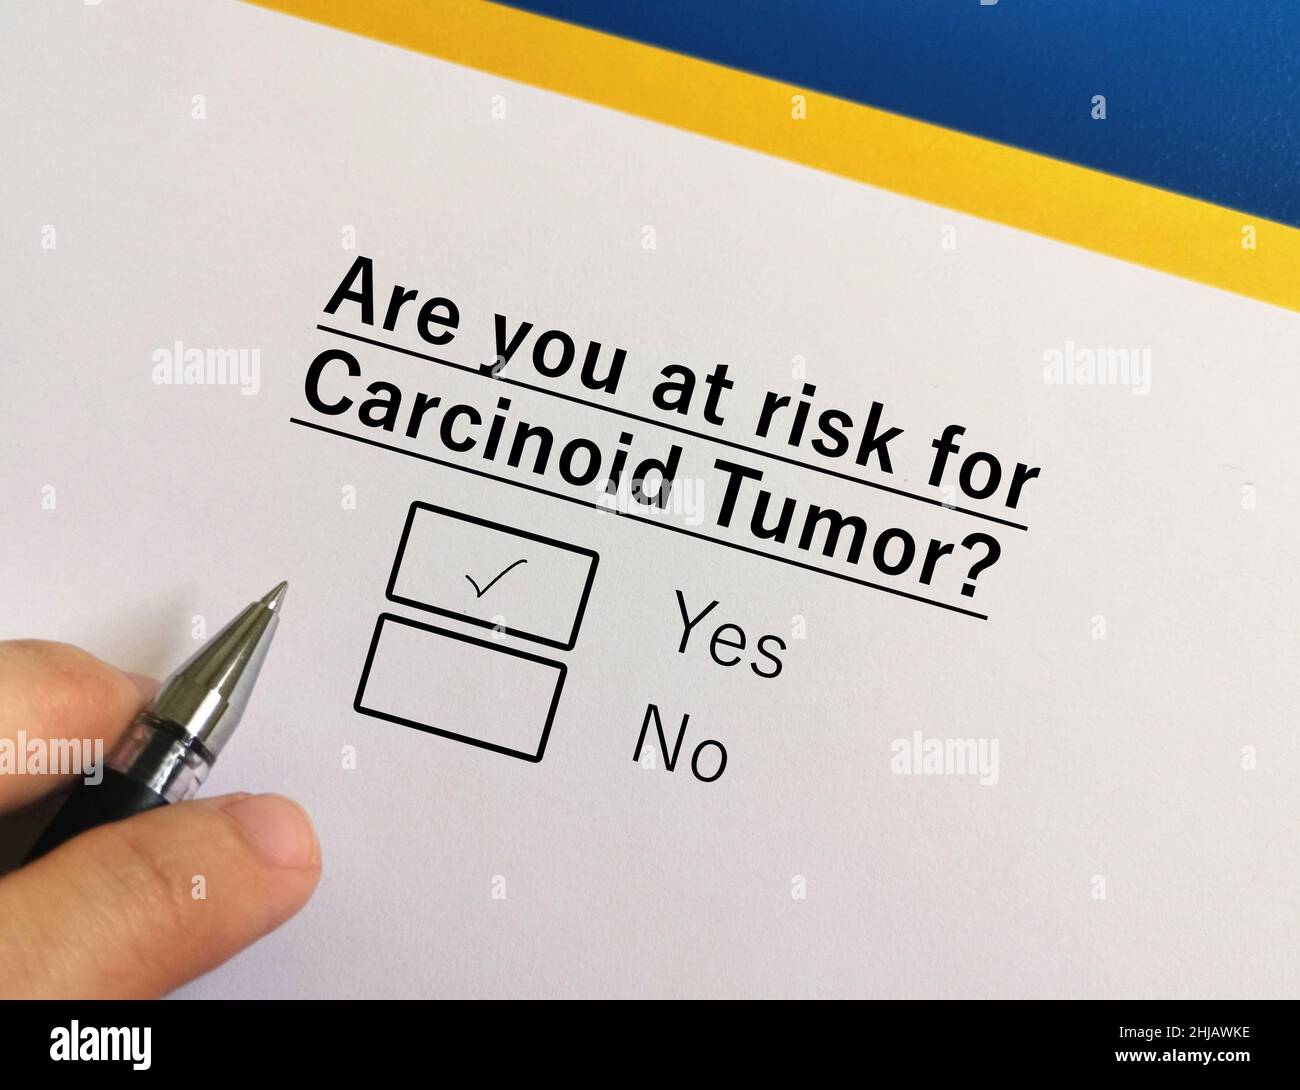 One person is answering question about cancer risk. He is at risk for carcinoid tumour. Stock Photo